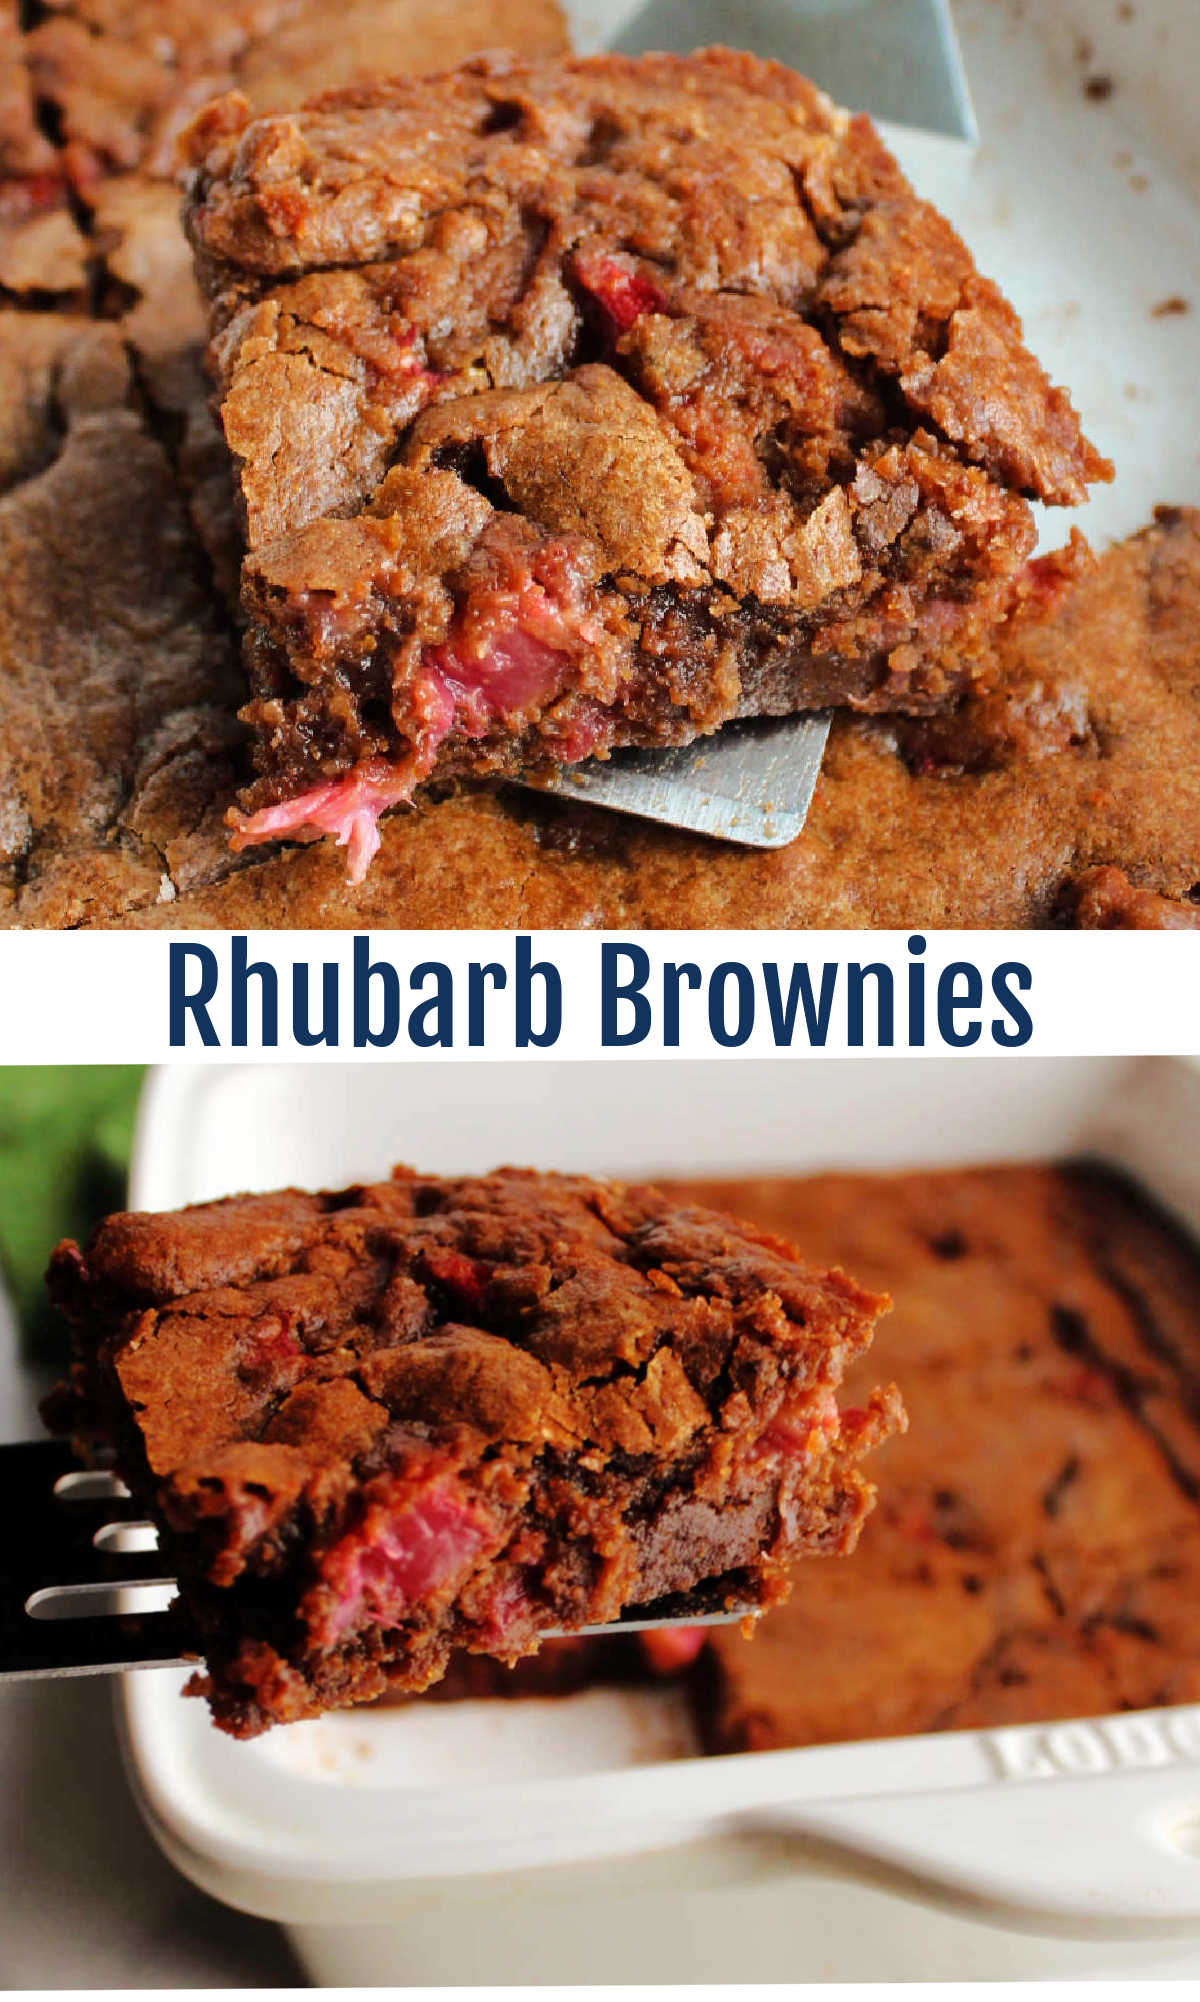 Rhubarb brownies combine rich fudgy chocolate and brown butter batter with bits of fresh rhubarb. It may sounds like a strange combination, but trust me it works!